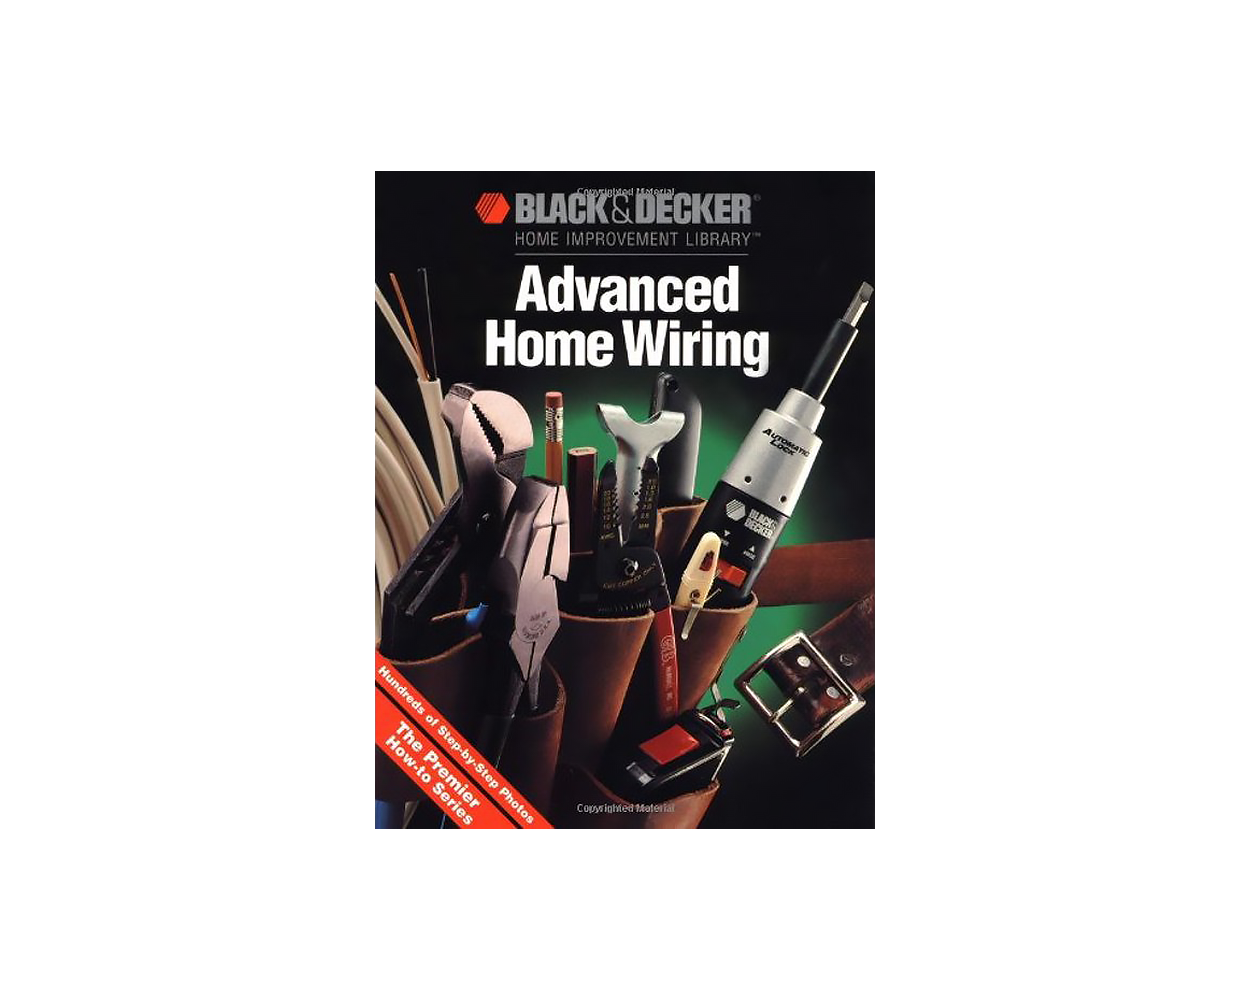 Wiring, Black&Decker Complete Guide To in the Books department at